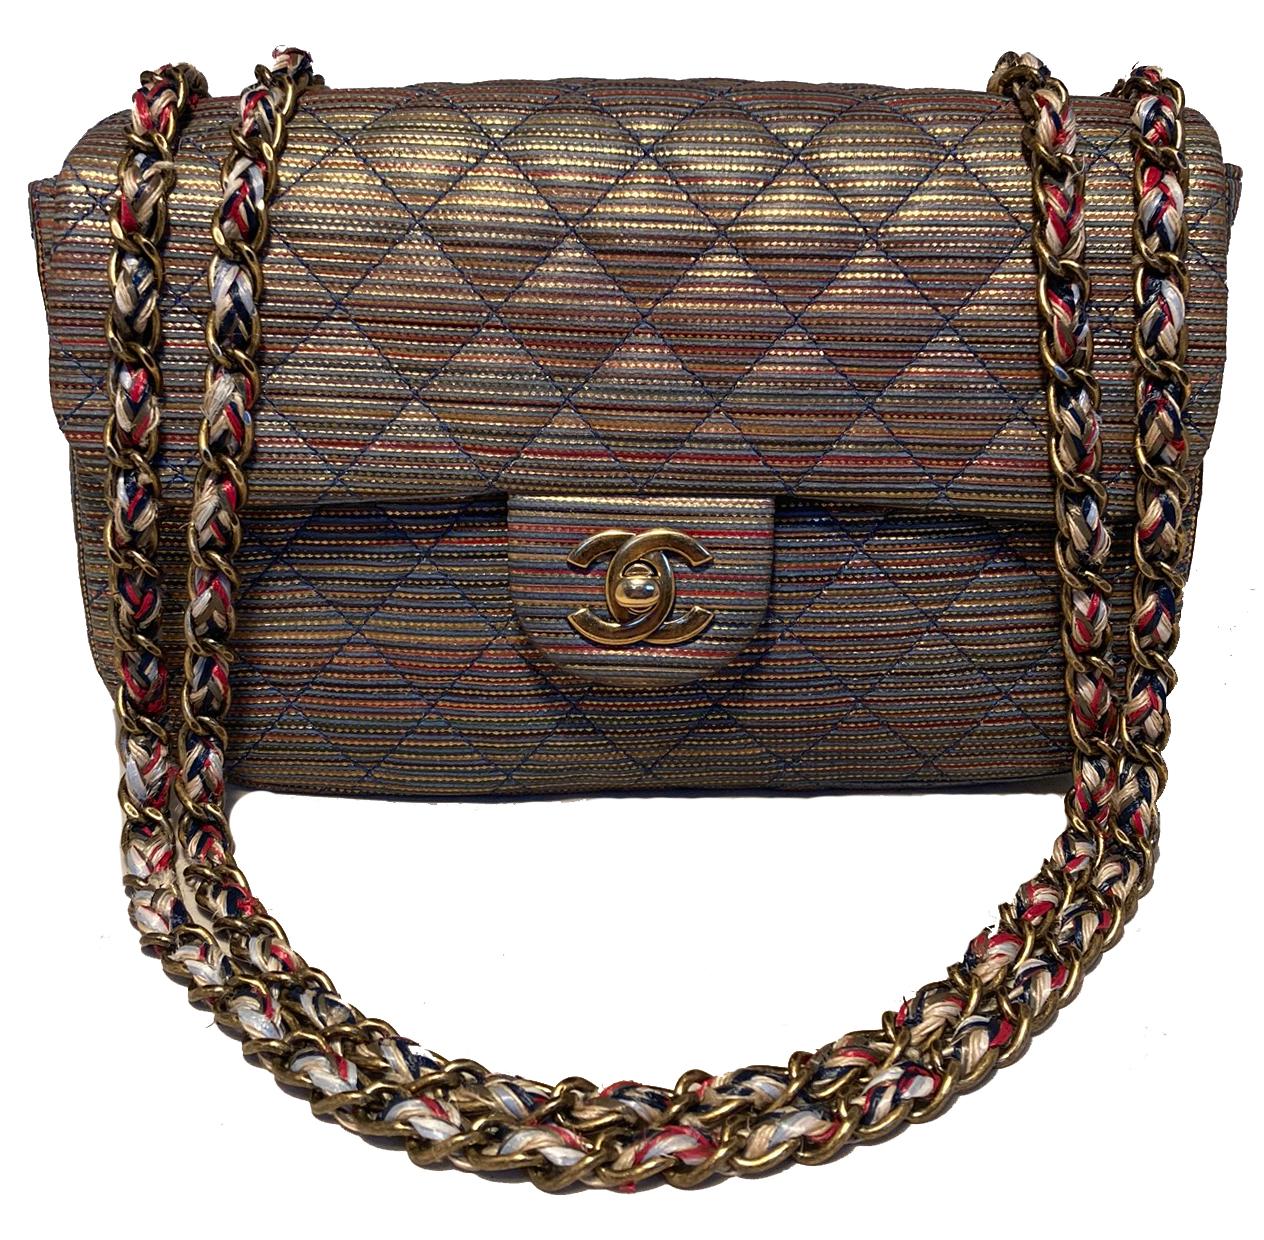 Chanel Rainbow Raffia Classic Flap Shoulder Bag in excellent condition. Beautiful multicolor raffia exterior woven with metallic gold thread and quilted in the signature Chanel diamond pattern trimmed with matte gold hardware. Woven matte gold chain